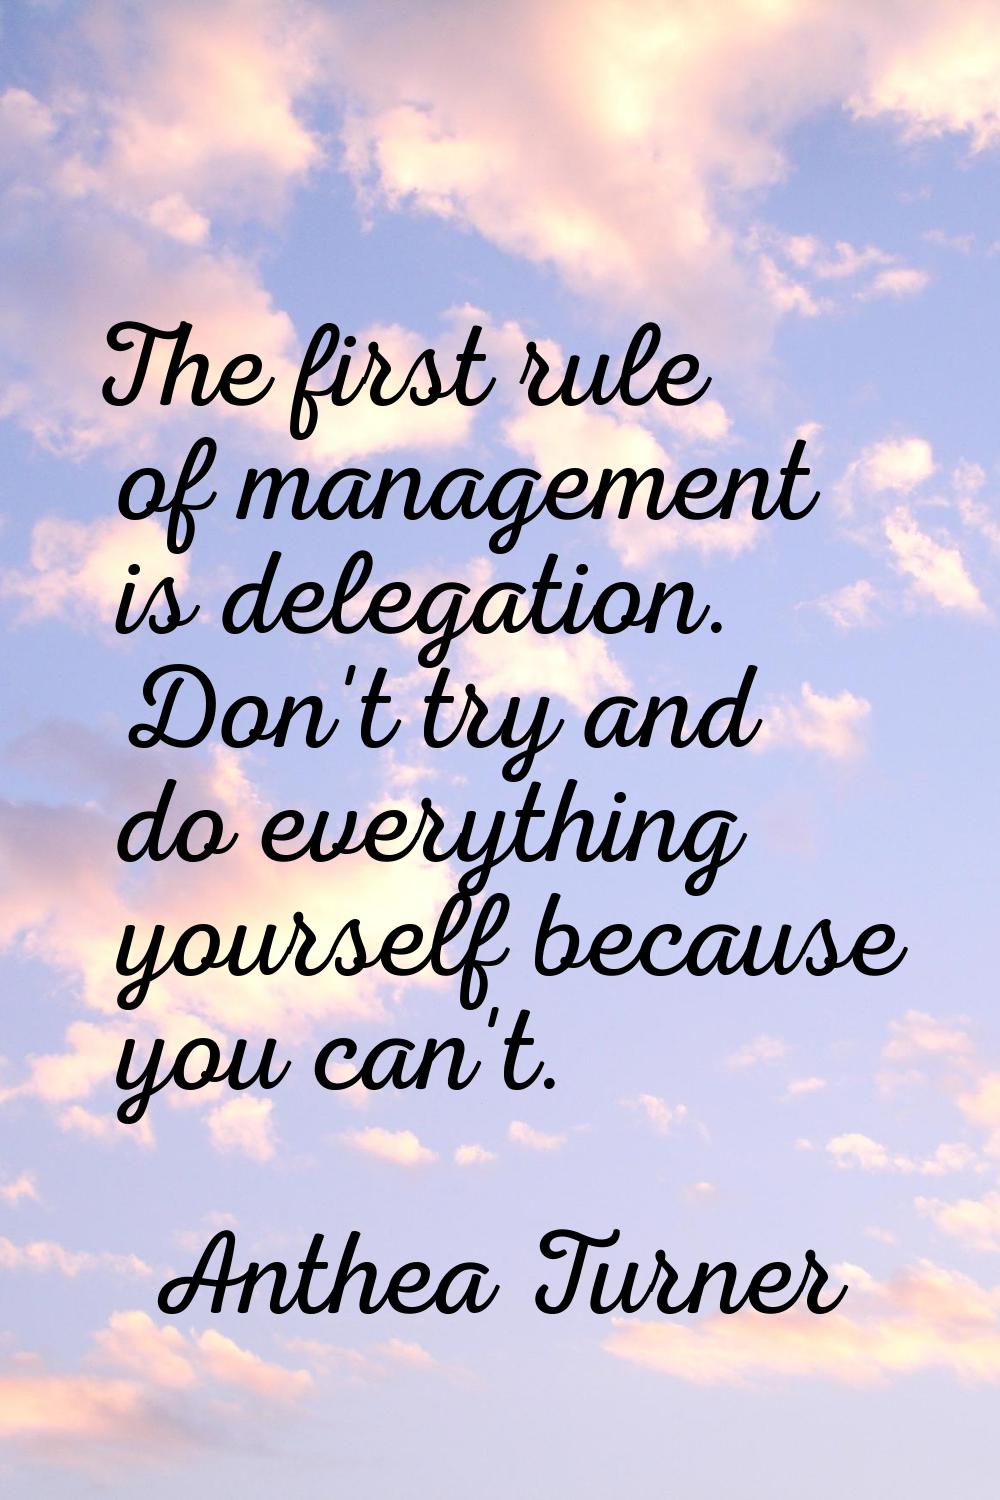 The first rule of management is delegation. Don't try and do everything yourself because you can't.